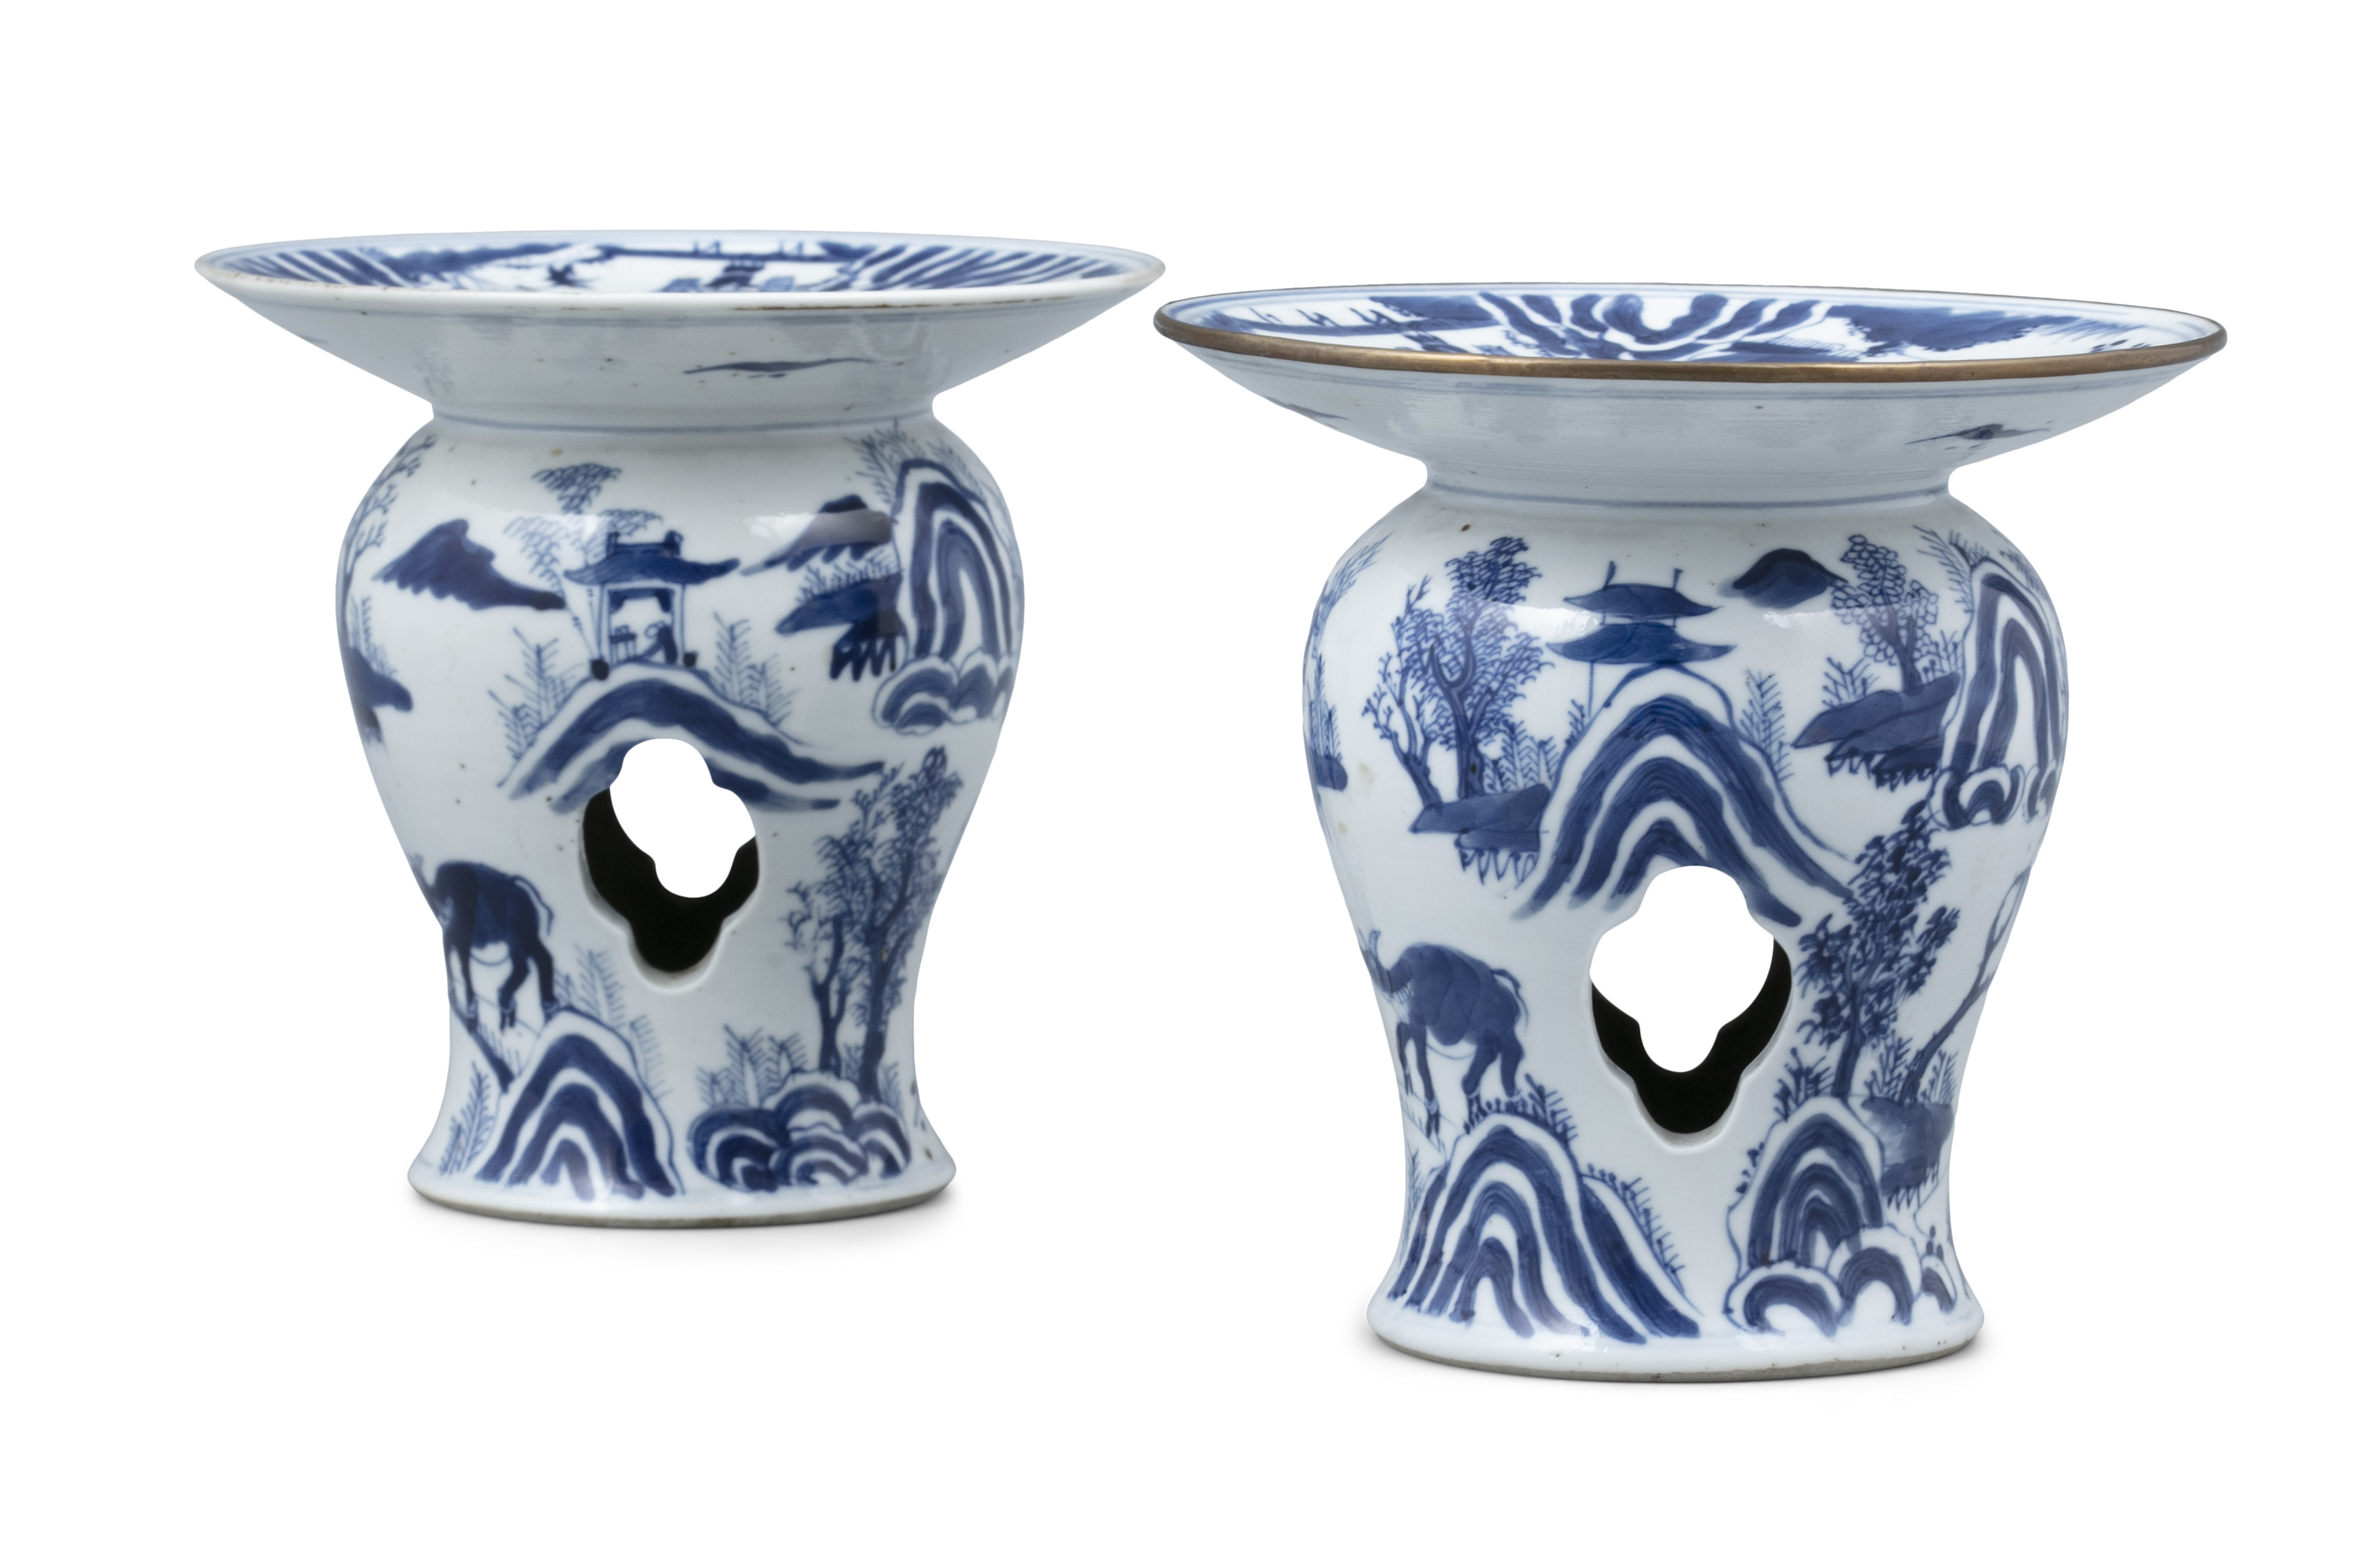 A PAIR OF BLUE AND WHITE ‘DAOIST IMMORTALS’ PORCELAIN DISH WARMERS WITH A SEAL MARK POSSIBLY